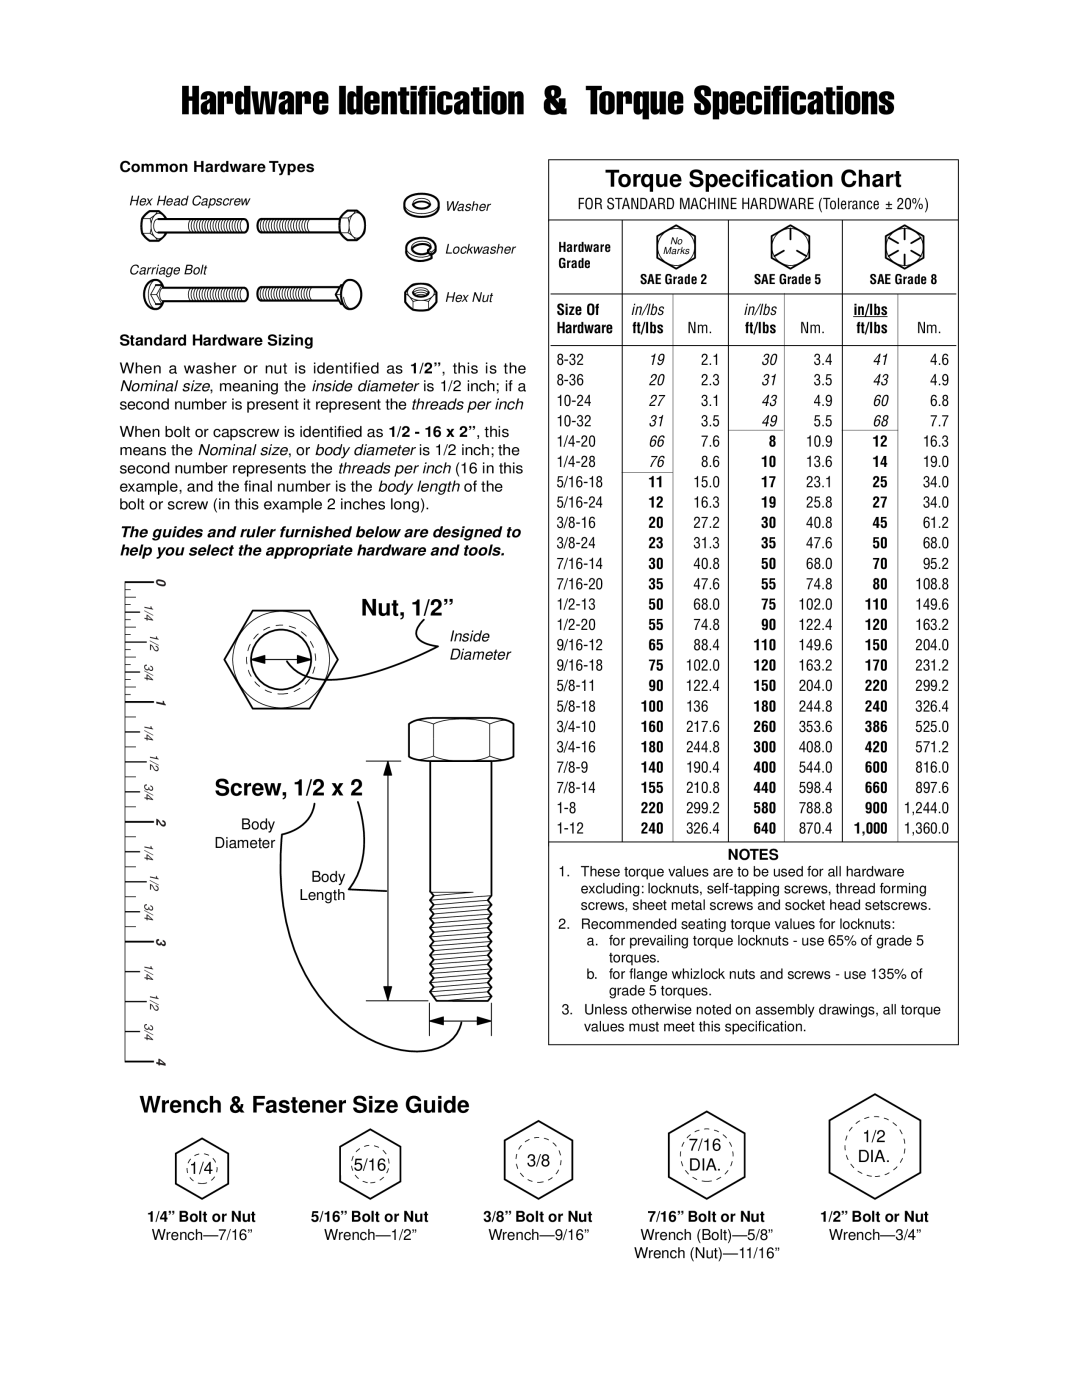 Simplicity 1693930 Torque Specification Chart, Hardware Identification & Torque Specifications, Nut, 1/2”, Screw, 1/2 x 